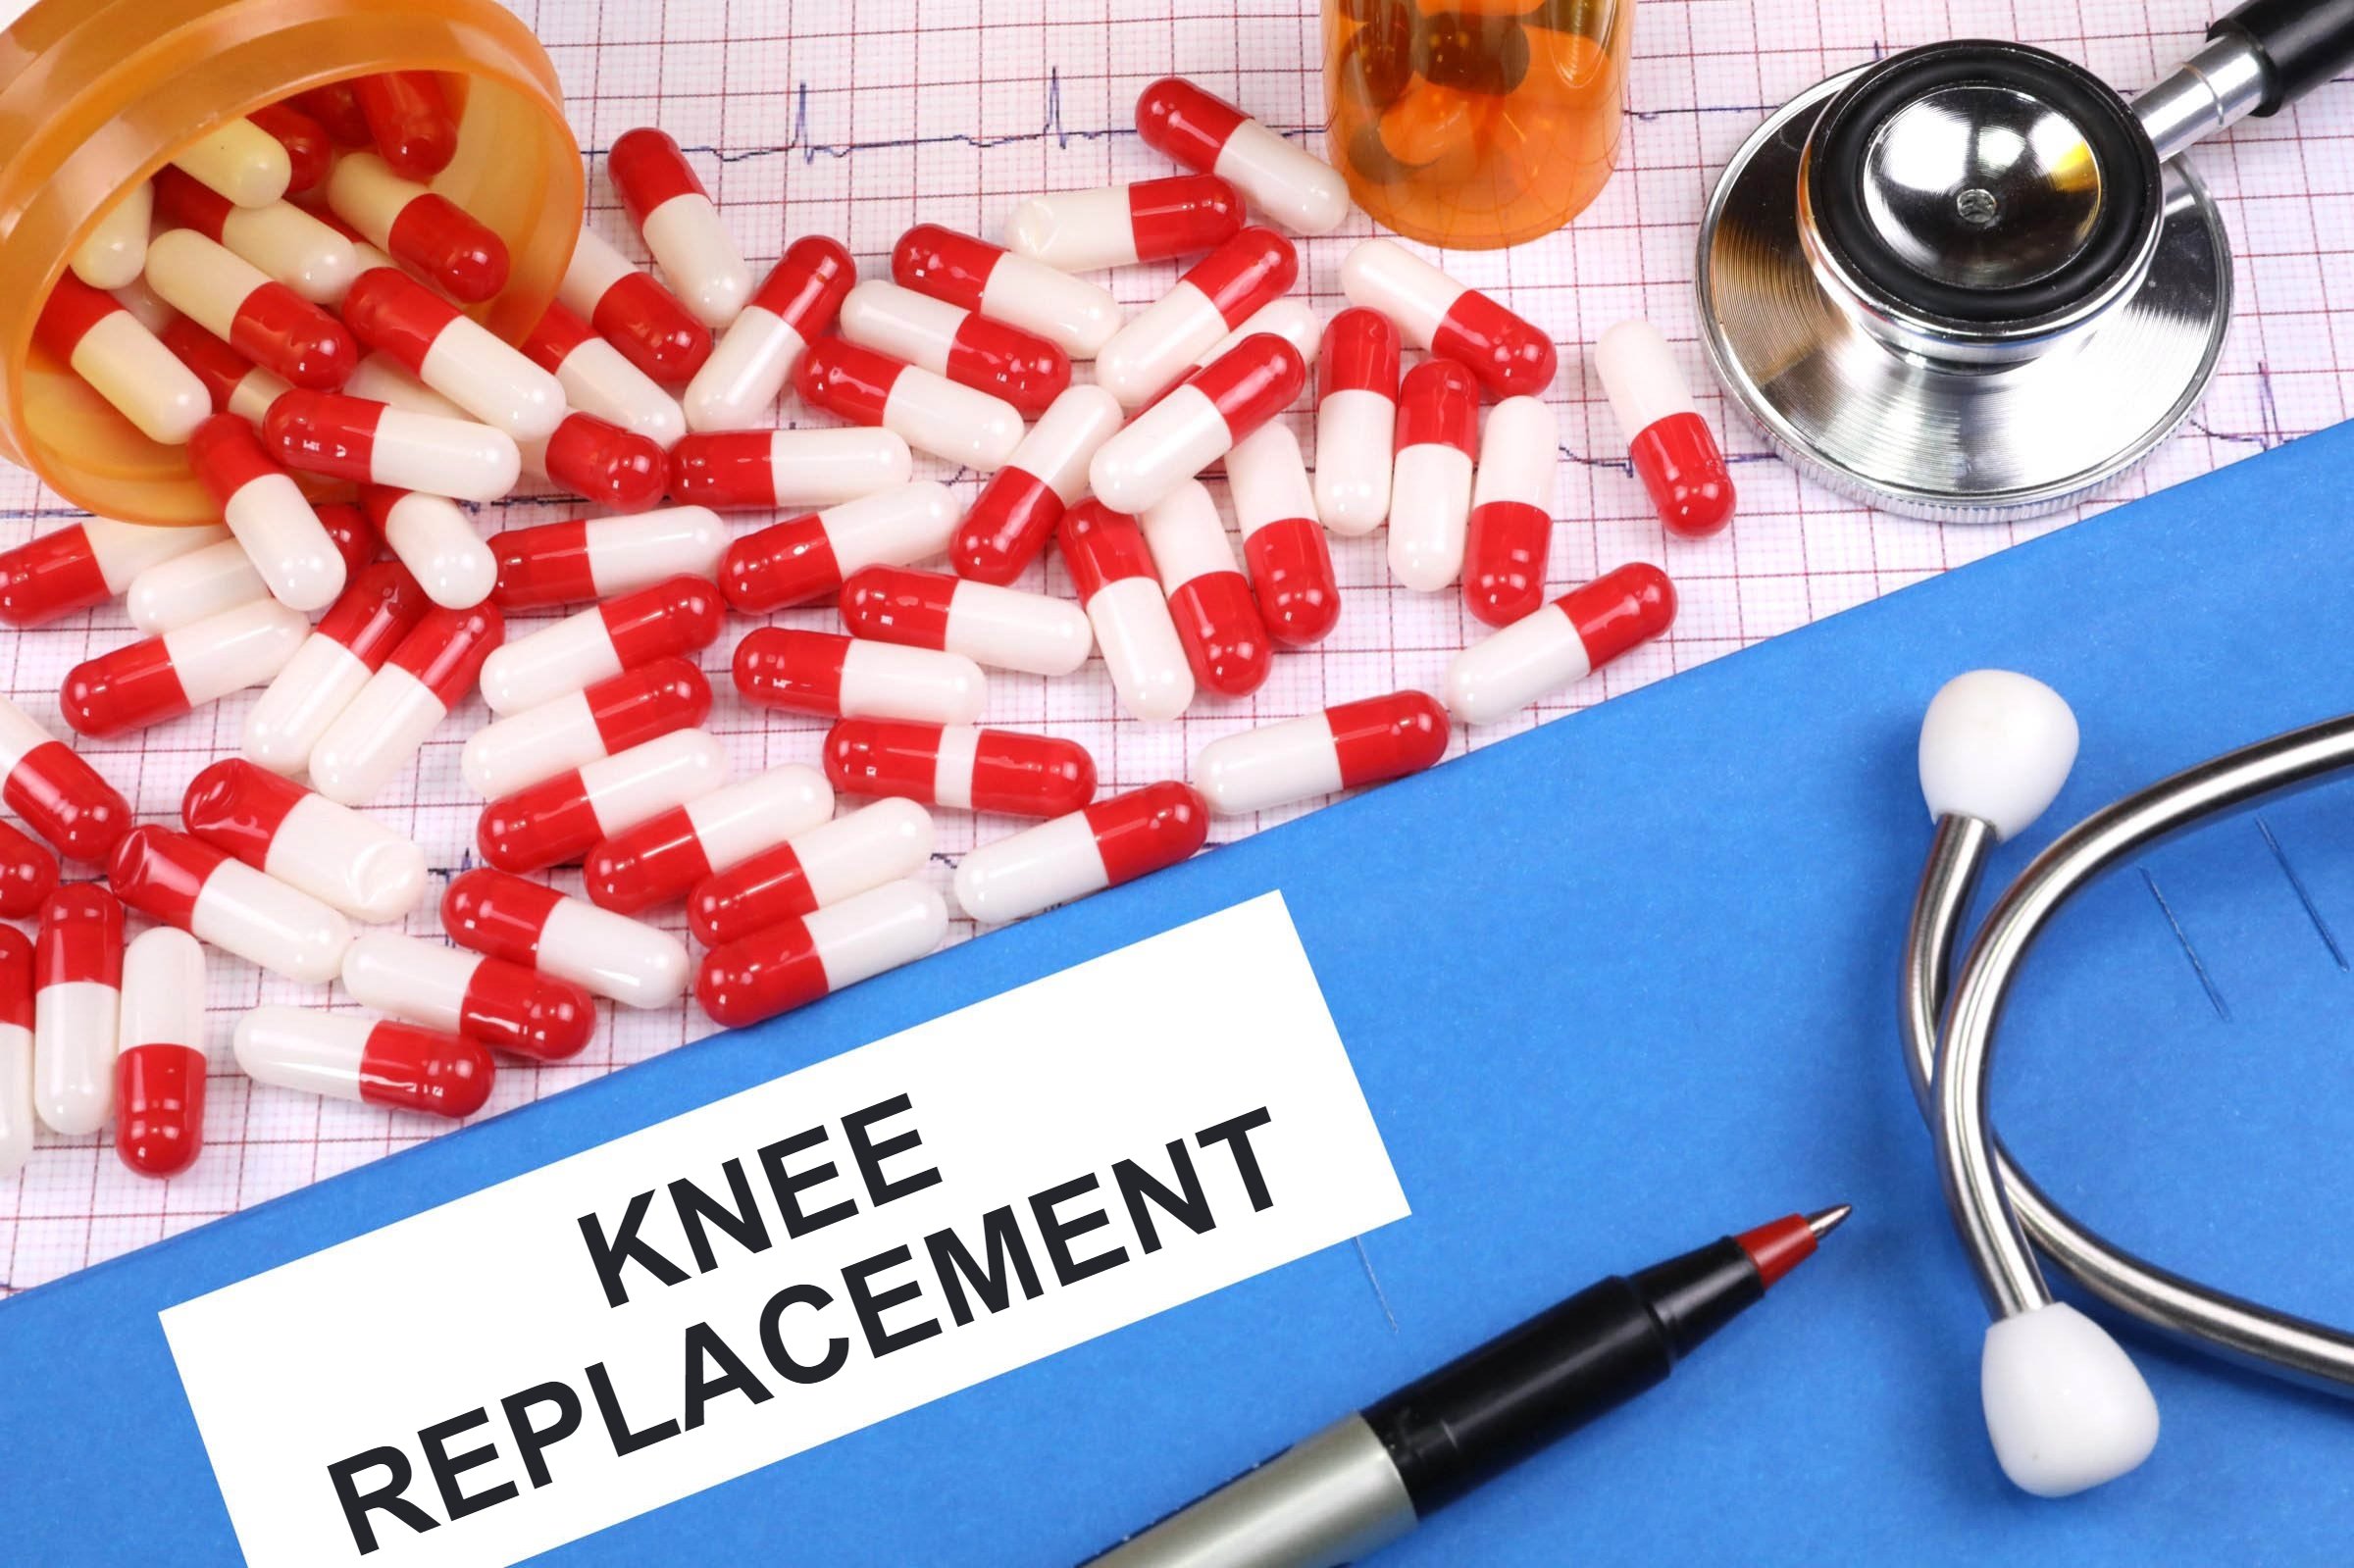 knee replacement